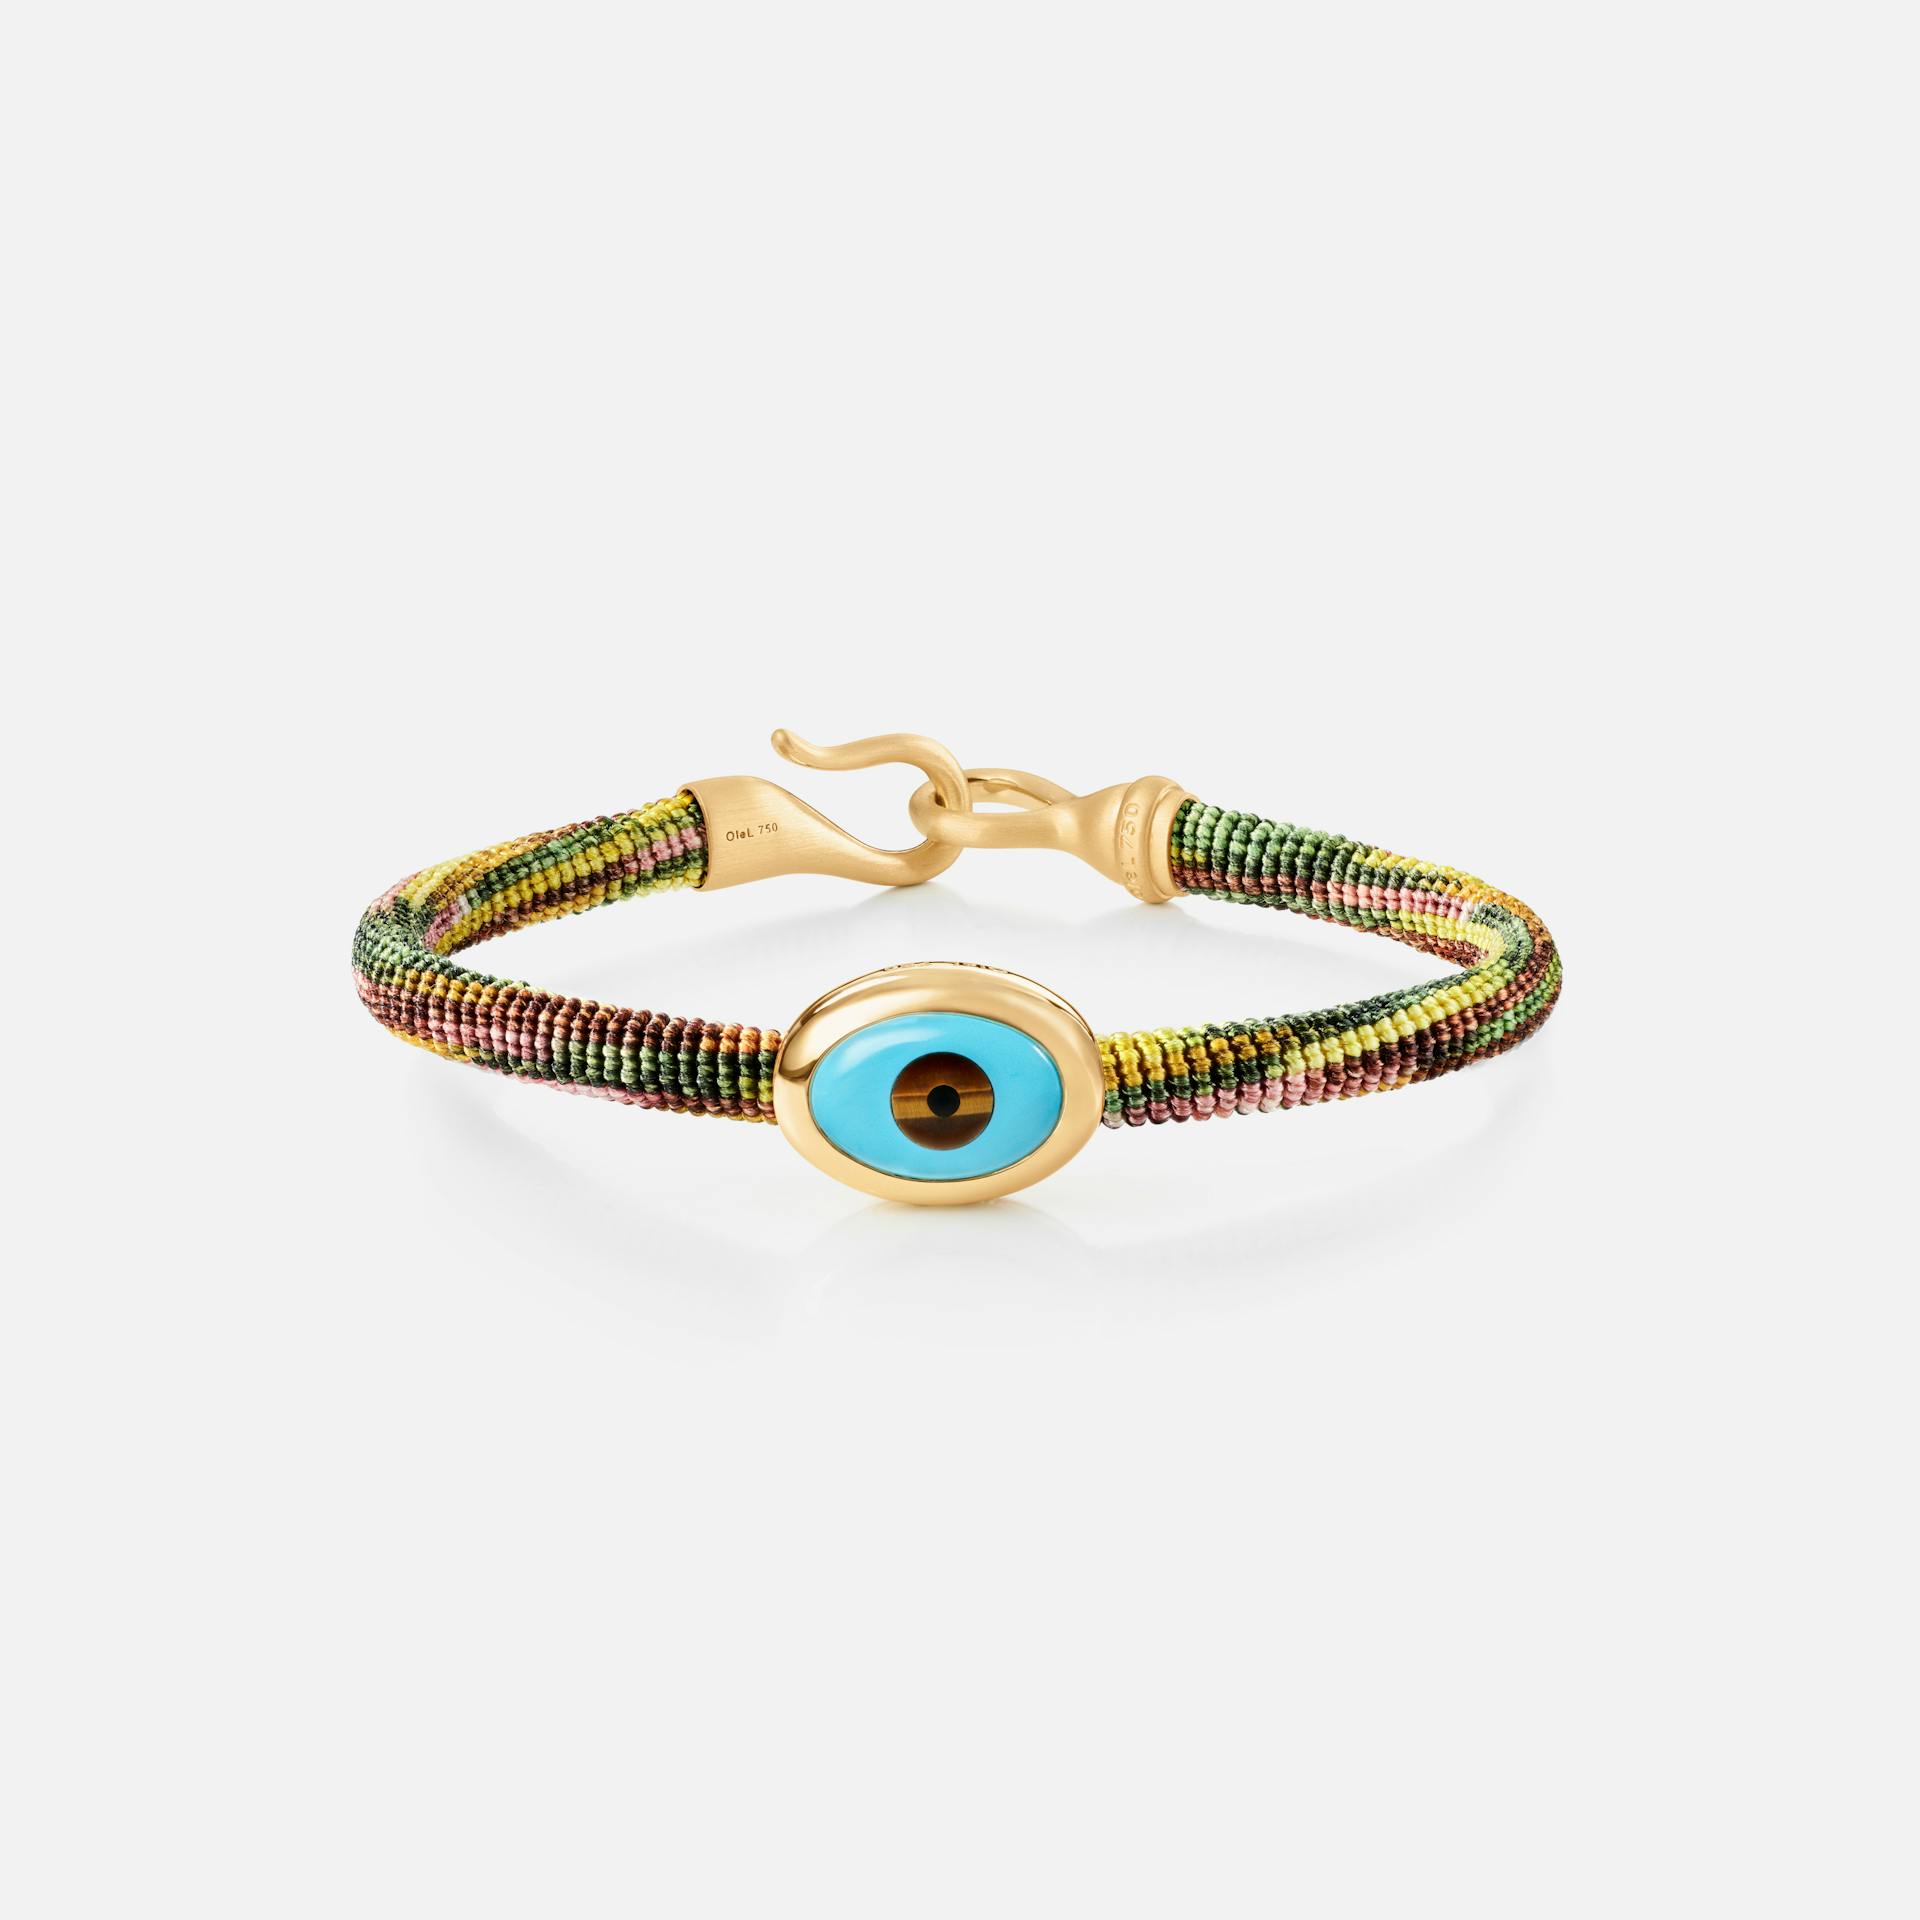 Life Bracelet with evil eye 6 mm 18k gold and turquoise with Plum rope